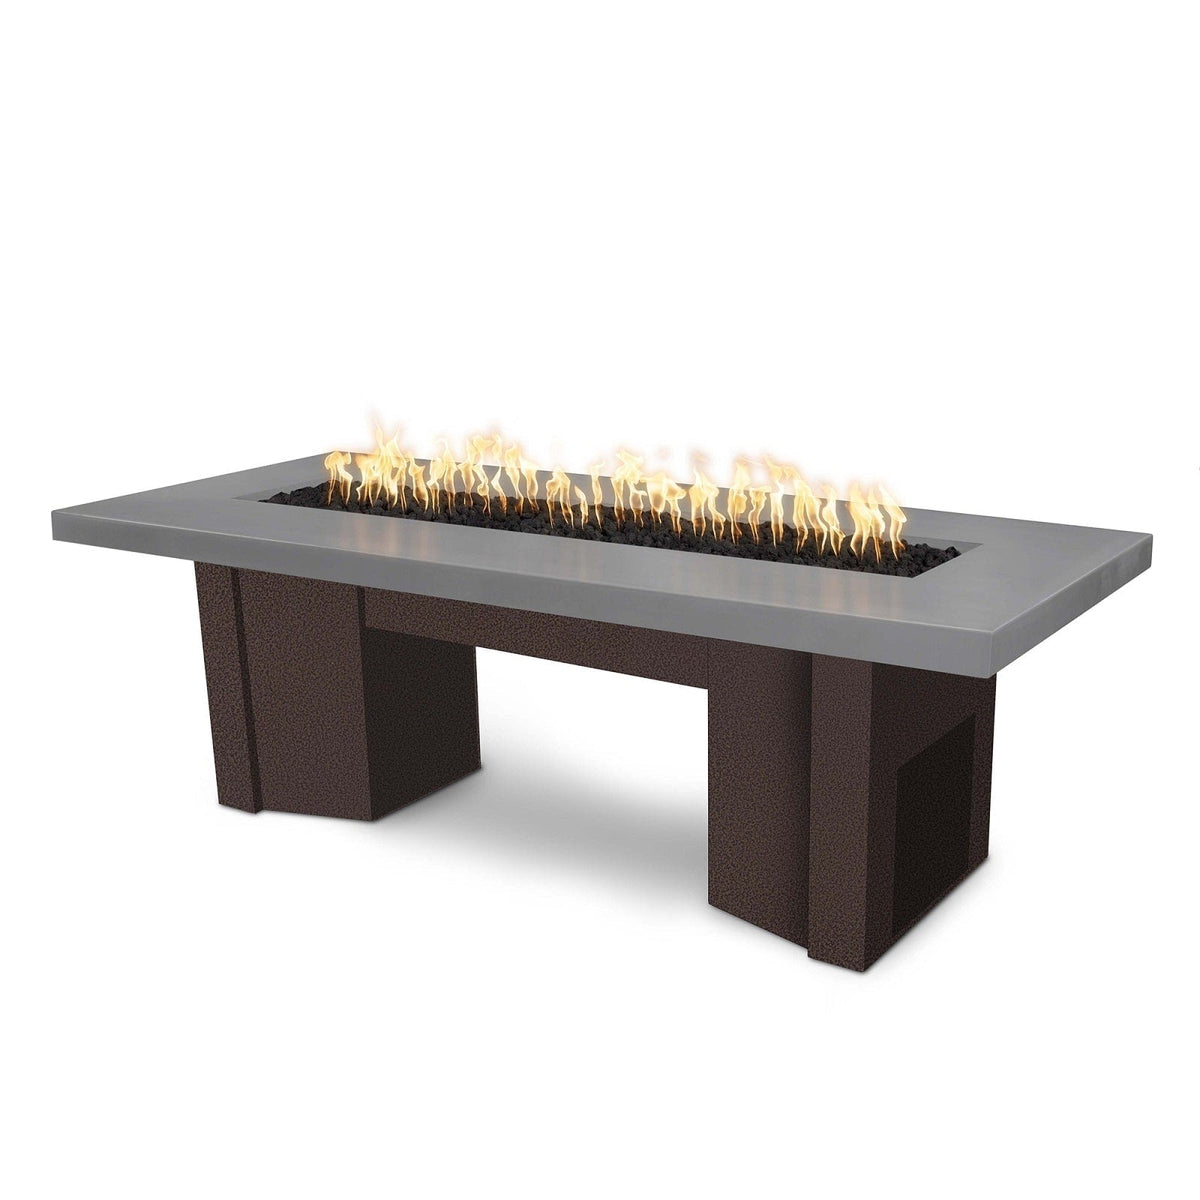 The Outdoor Plus Fire Features Natural Gray (-NGY) / Copper Vein Powder Coated Steel (-CPV) The Outdoor Plus 78&quot; Alameda Fire Table Smooth Concrete in Liquid Propane - Flame Sense System with Push Button Spark Igniter / OPT-ALMGFRC78FSEN-LP